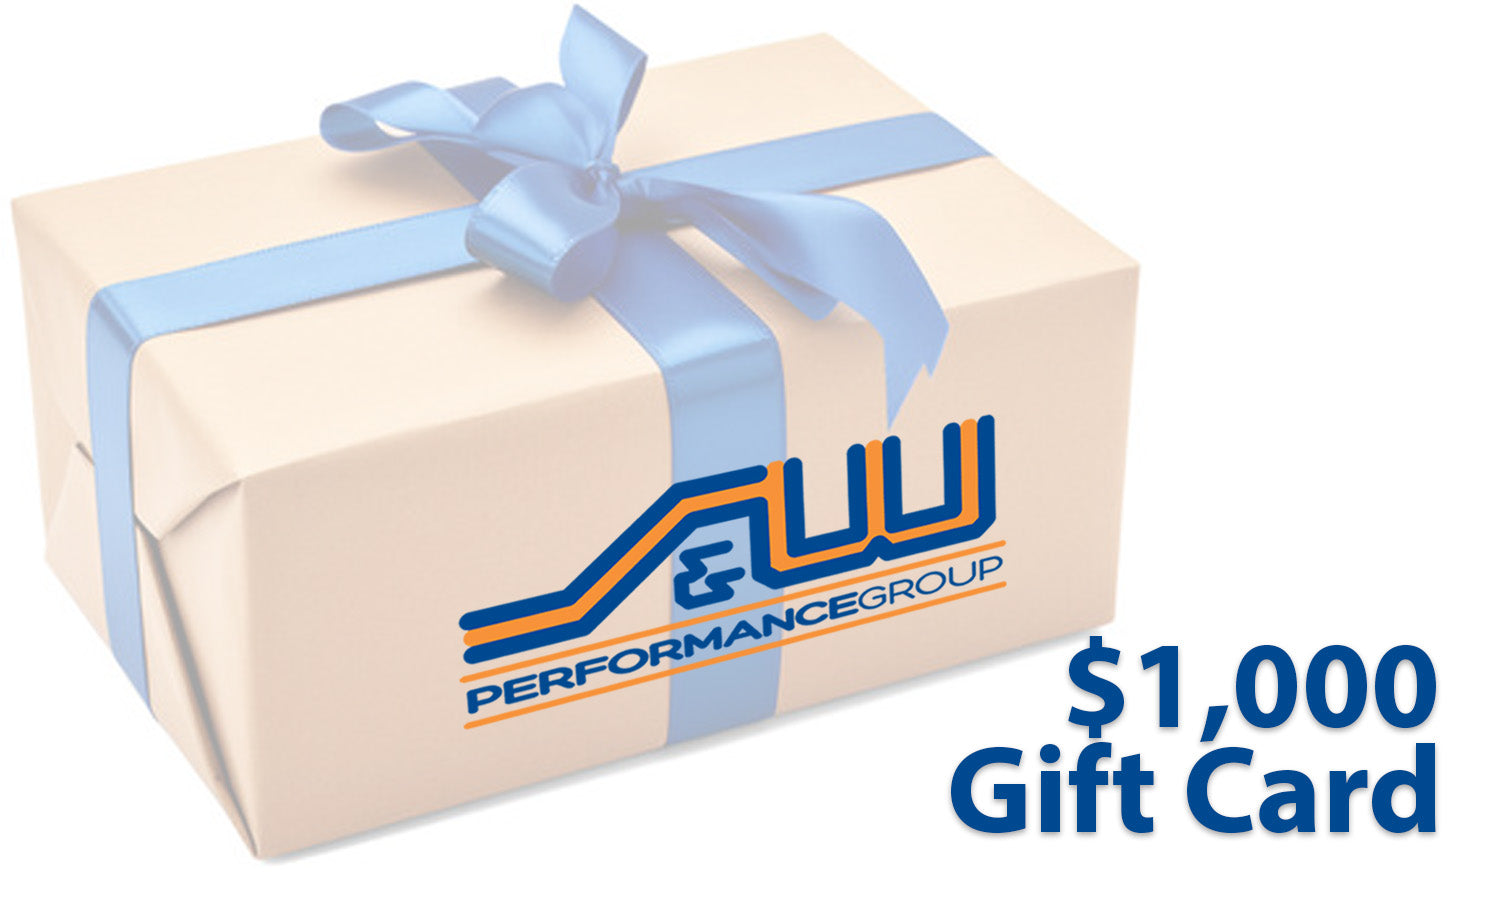 S&W Performance Group $1,000 Gift Card